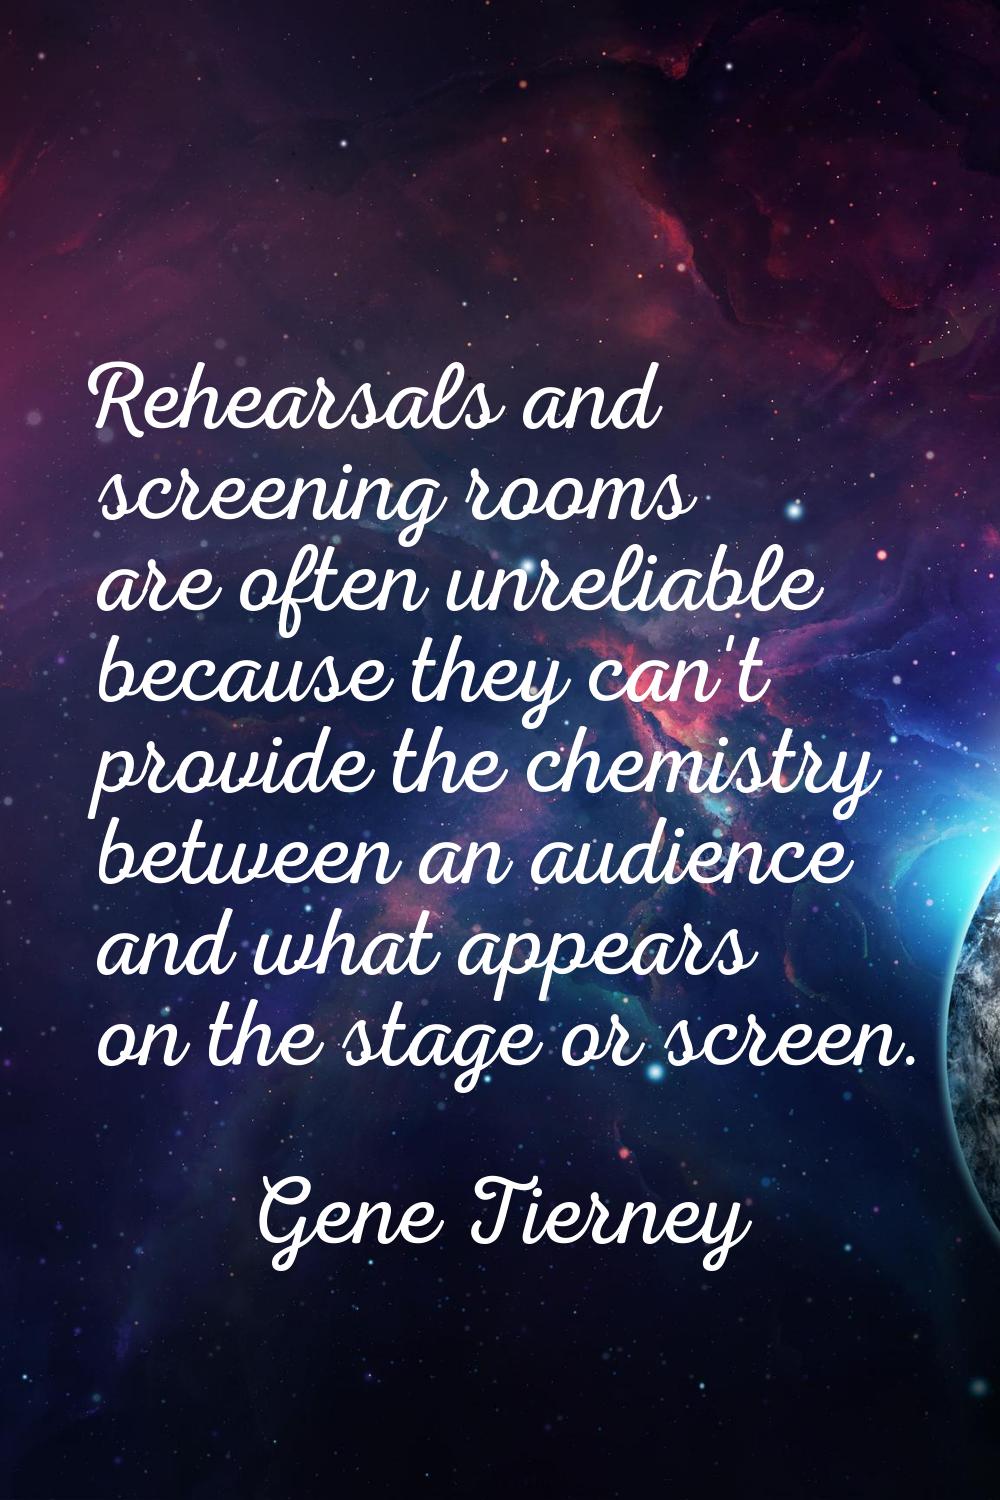 Rehearsals and screening rooms are often unreliable because they can't provide the chemistry betwee